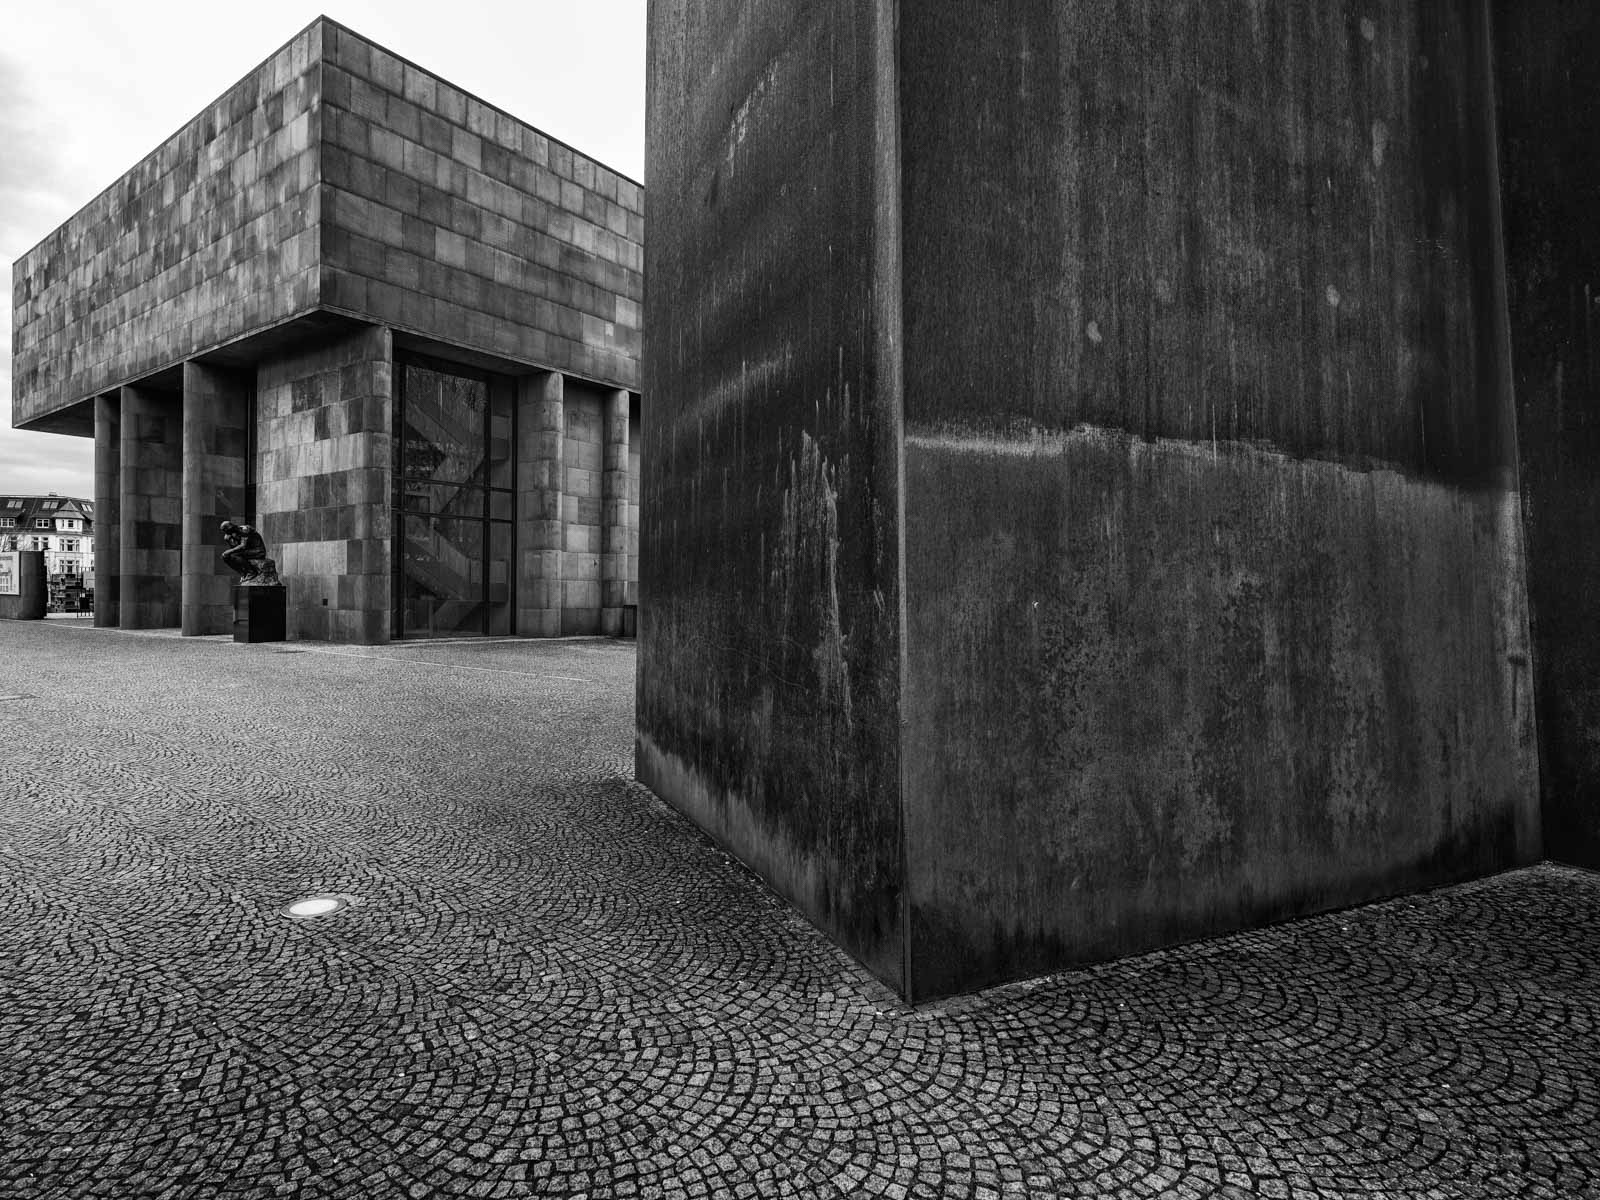 Sculpture 'Axis' by Richard Serra in front of the Kunsthalle Bielefeld (Germany).